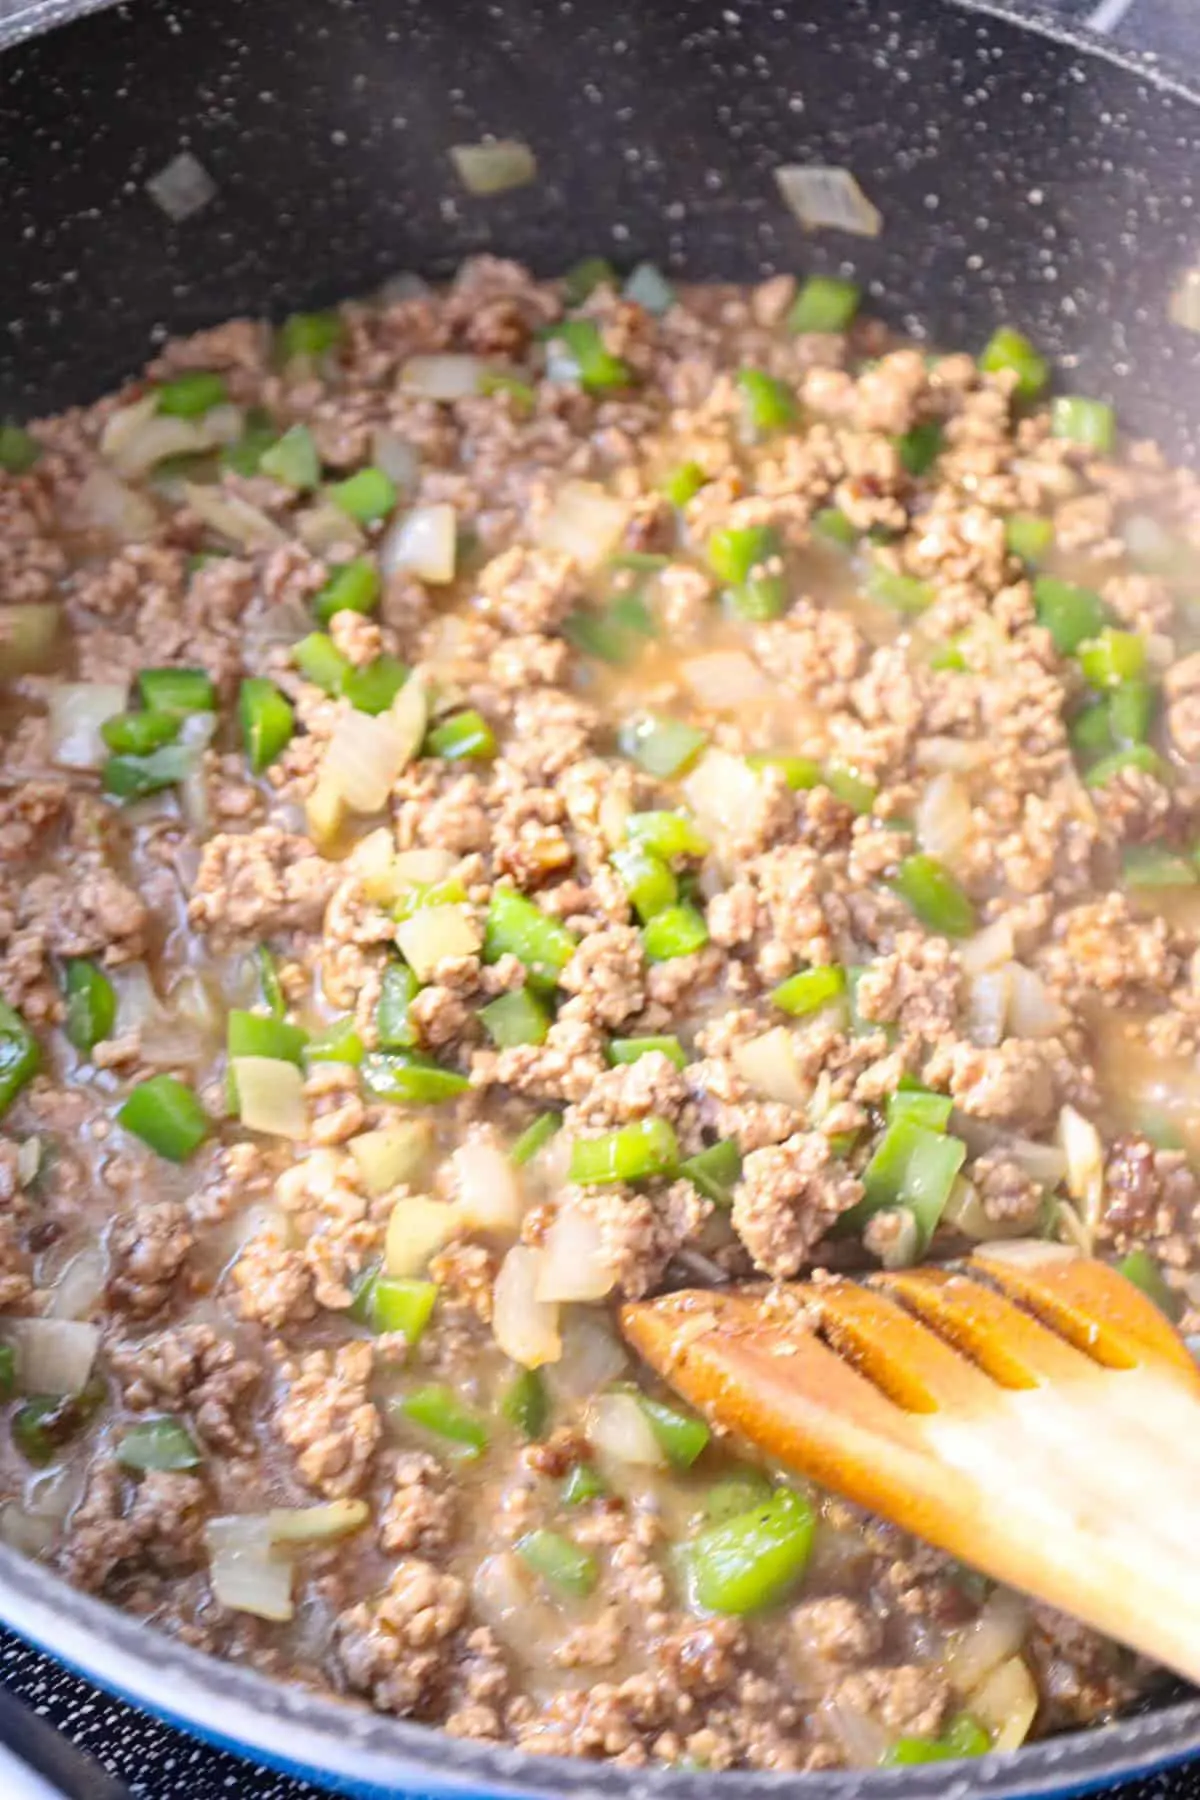 cooked ground beef and diced green peppers in gravy mixture